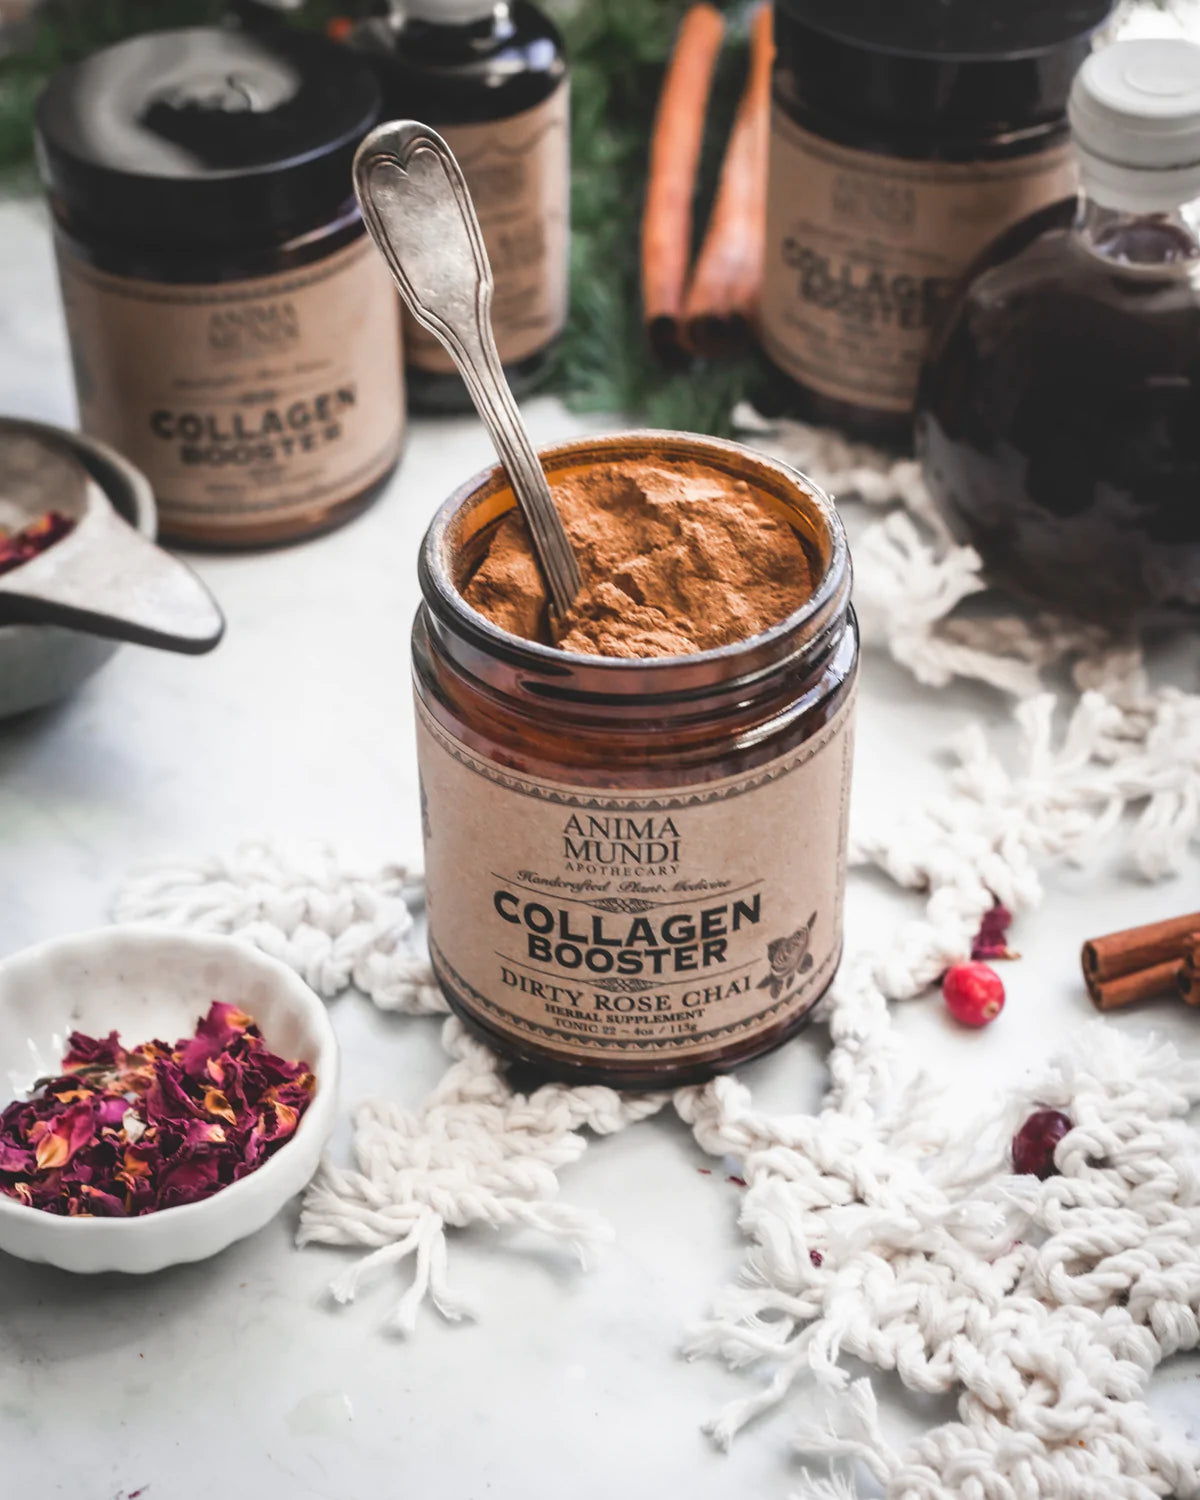 COLLAGEN BOOSTER Dirty Rose Chai: Plantbased